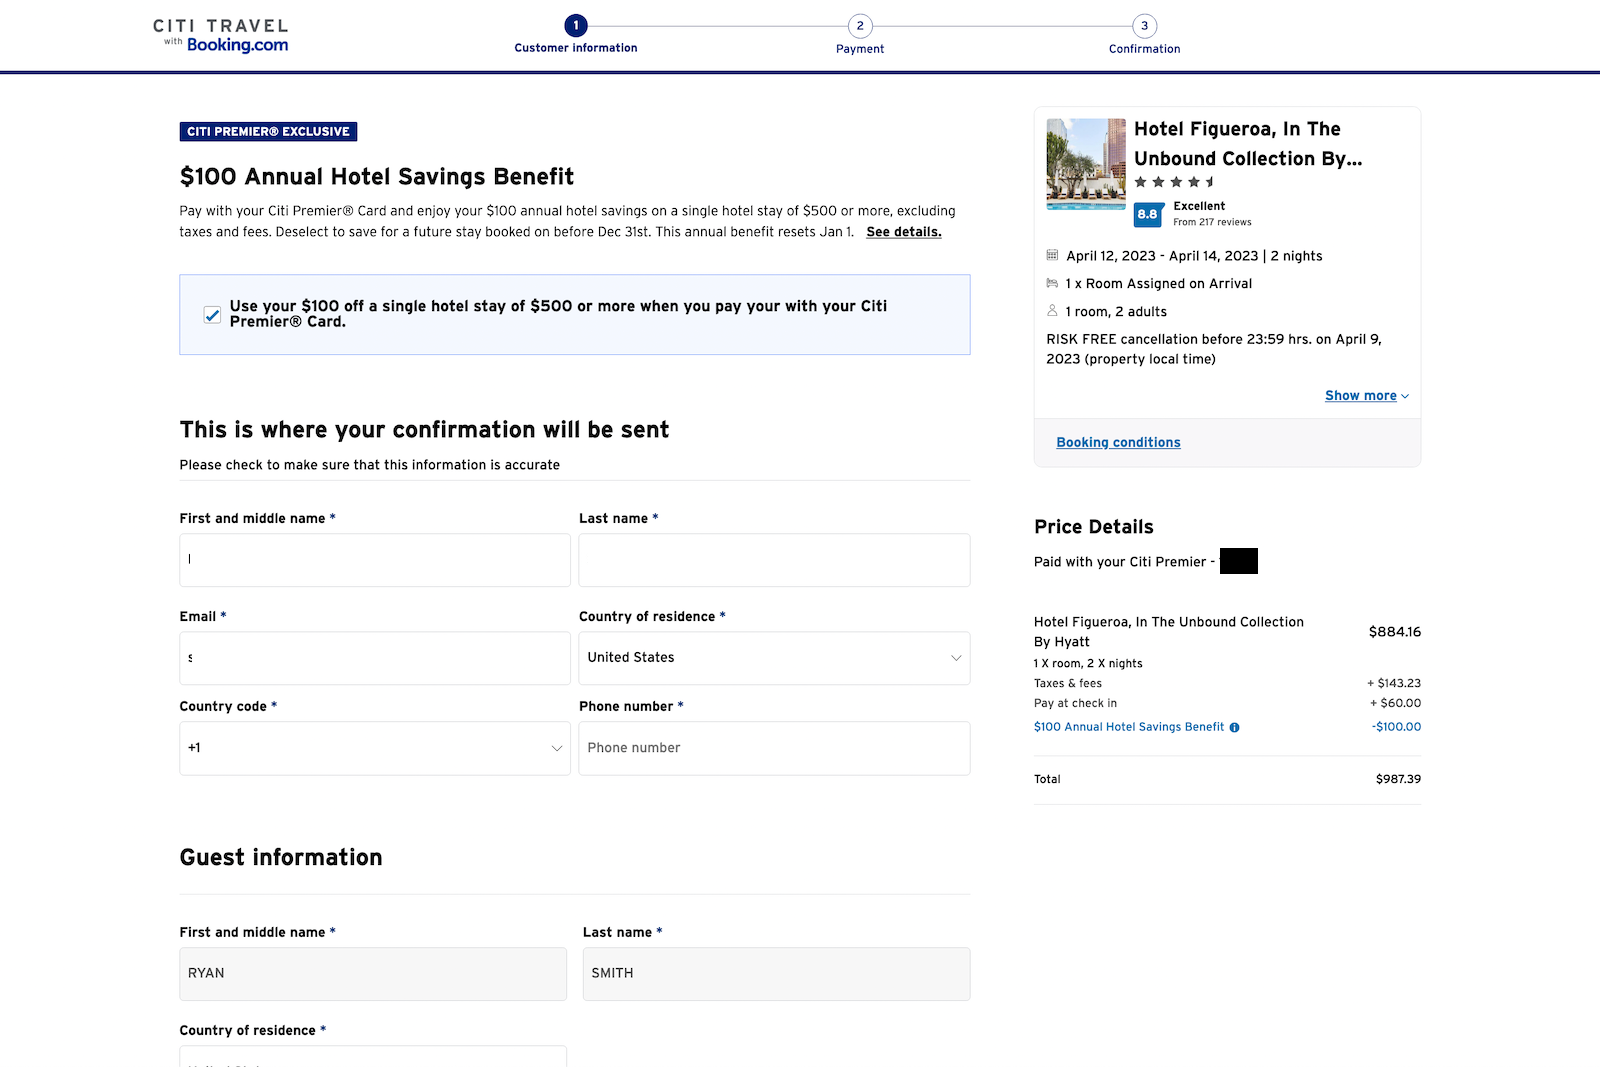 Payment page for a hotel reservation, showing the option to pay with points and use additional perks from a Citi Premier credit card